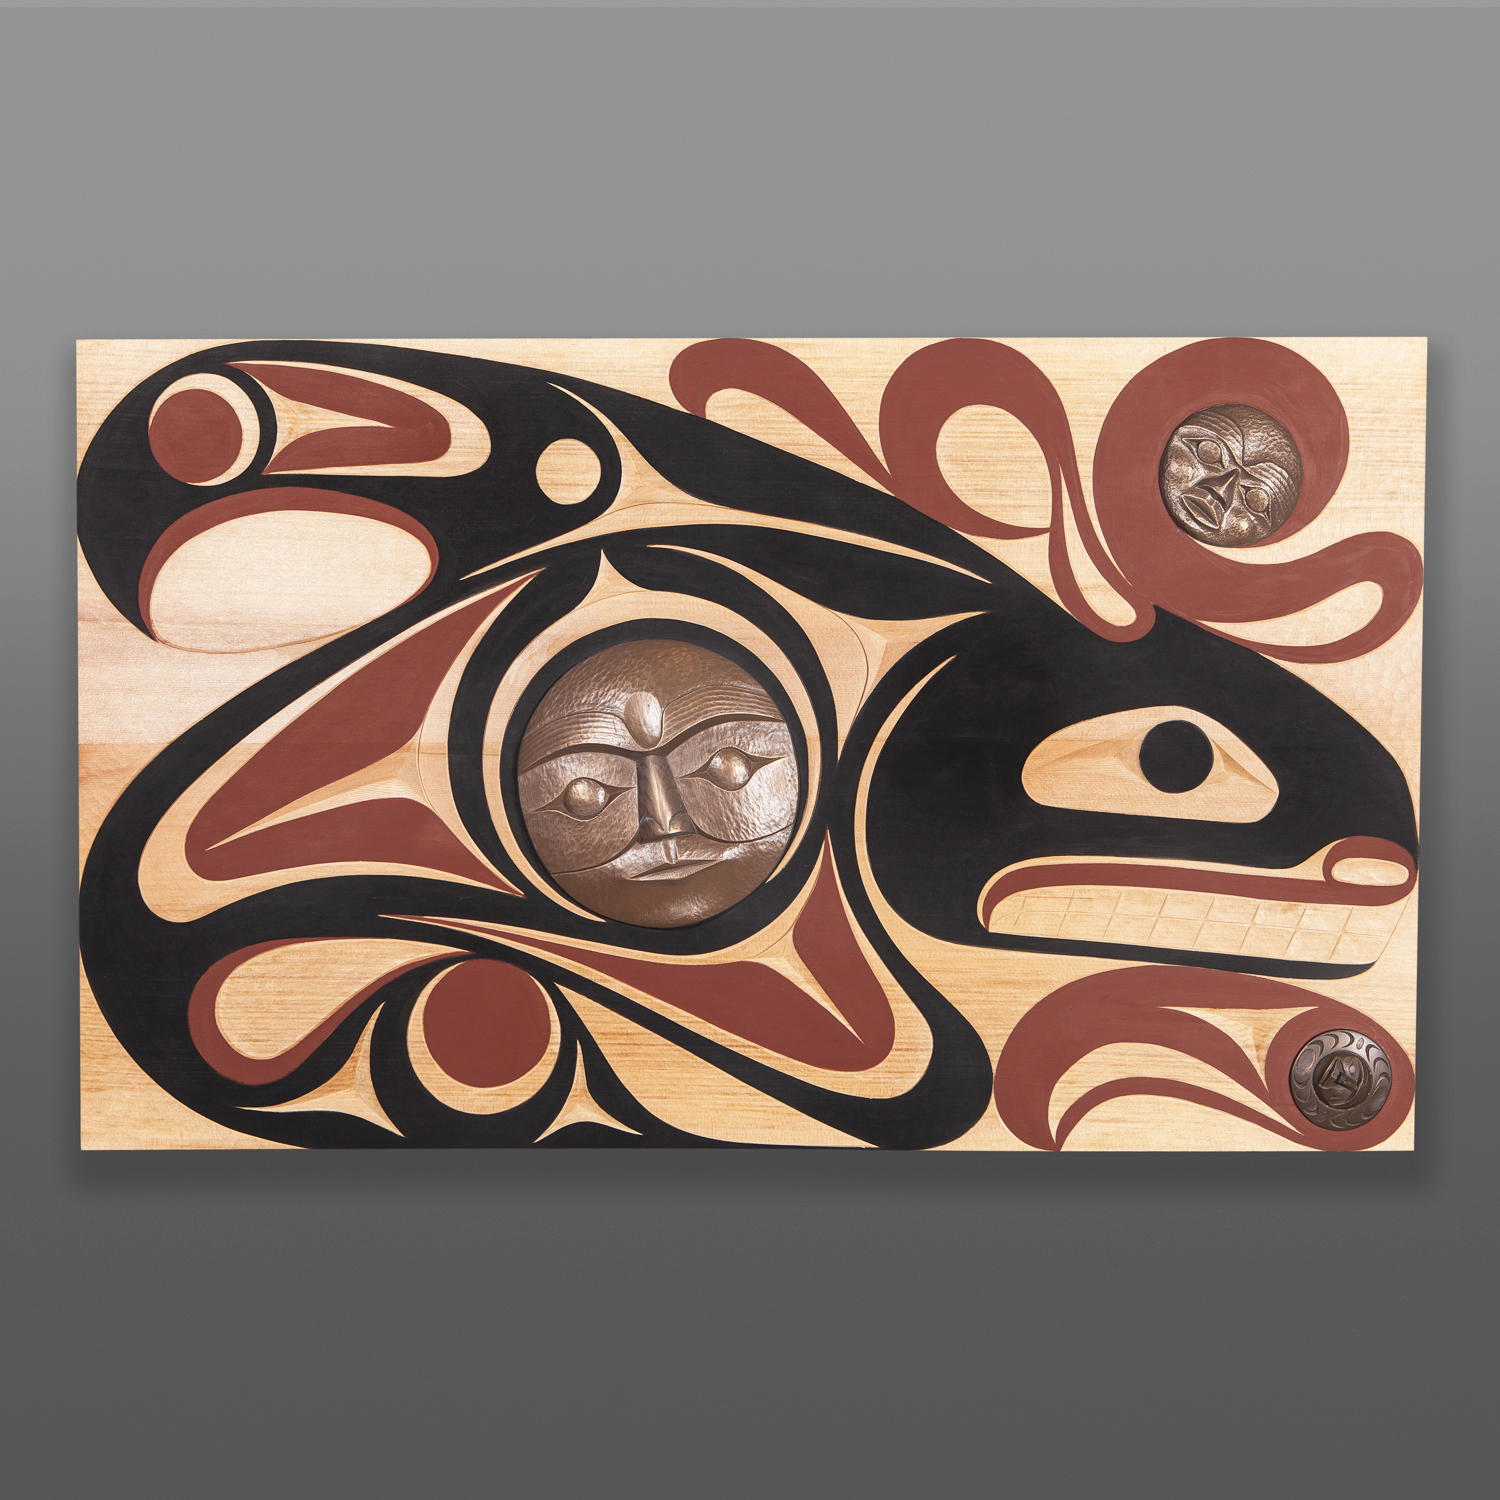 Keeper of the Water Andy & Ruth Peterson Coast Salish Red cedar, cold-cast bronze, paint 36" x 21½" x 2" $5800